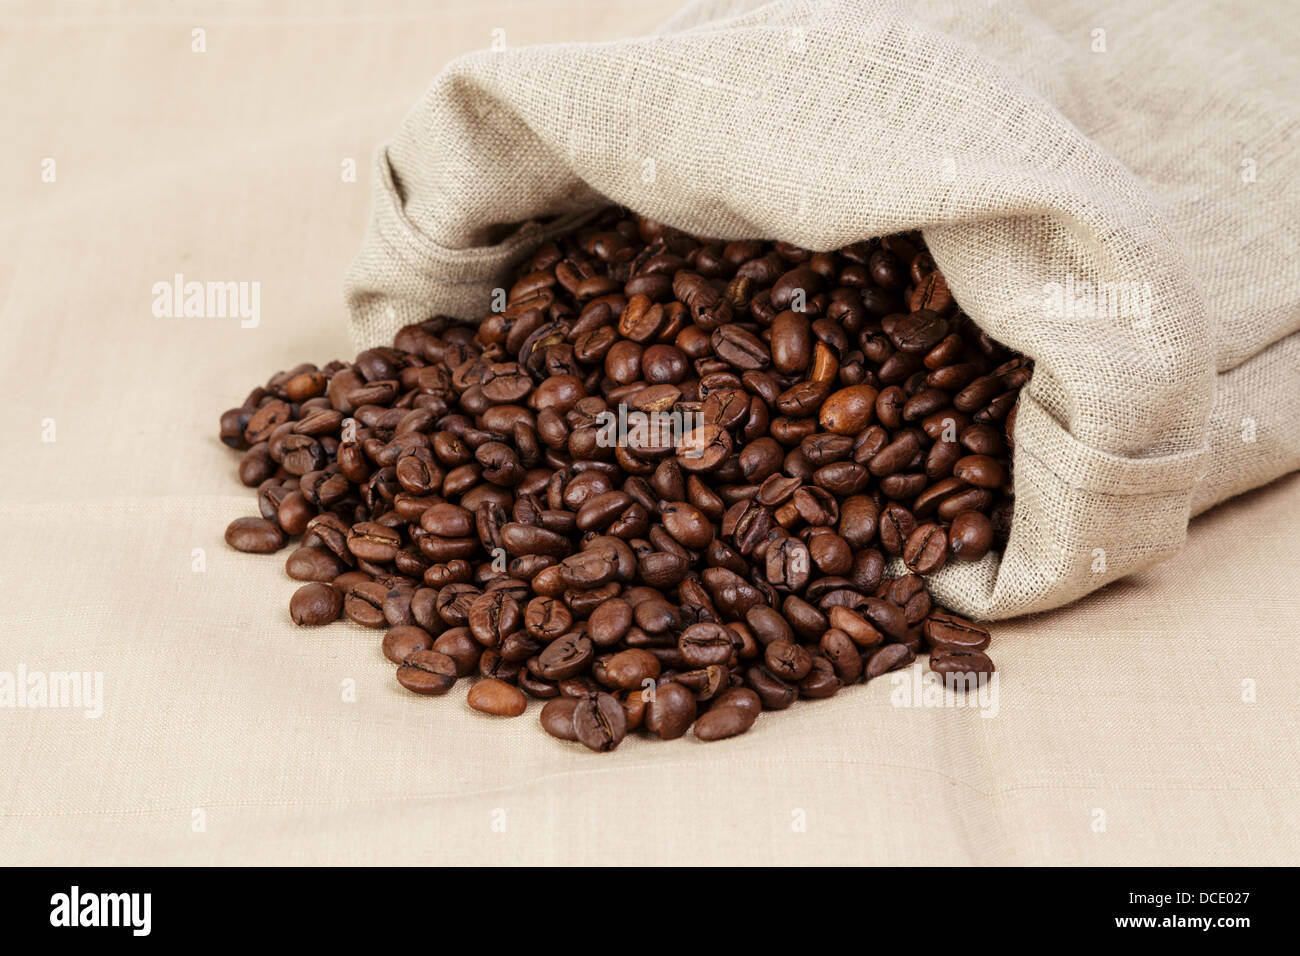 roasted coffee beans spill out of the bag, textile Stock Photo